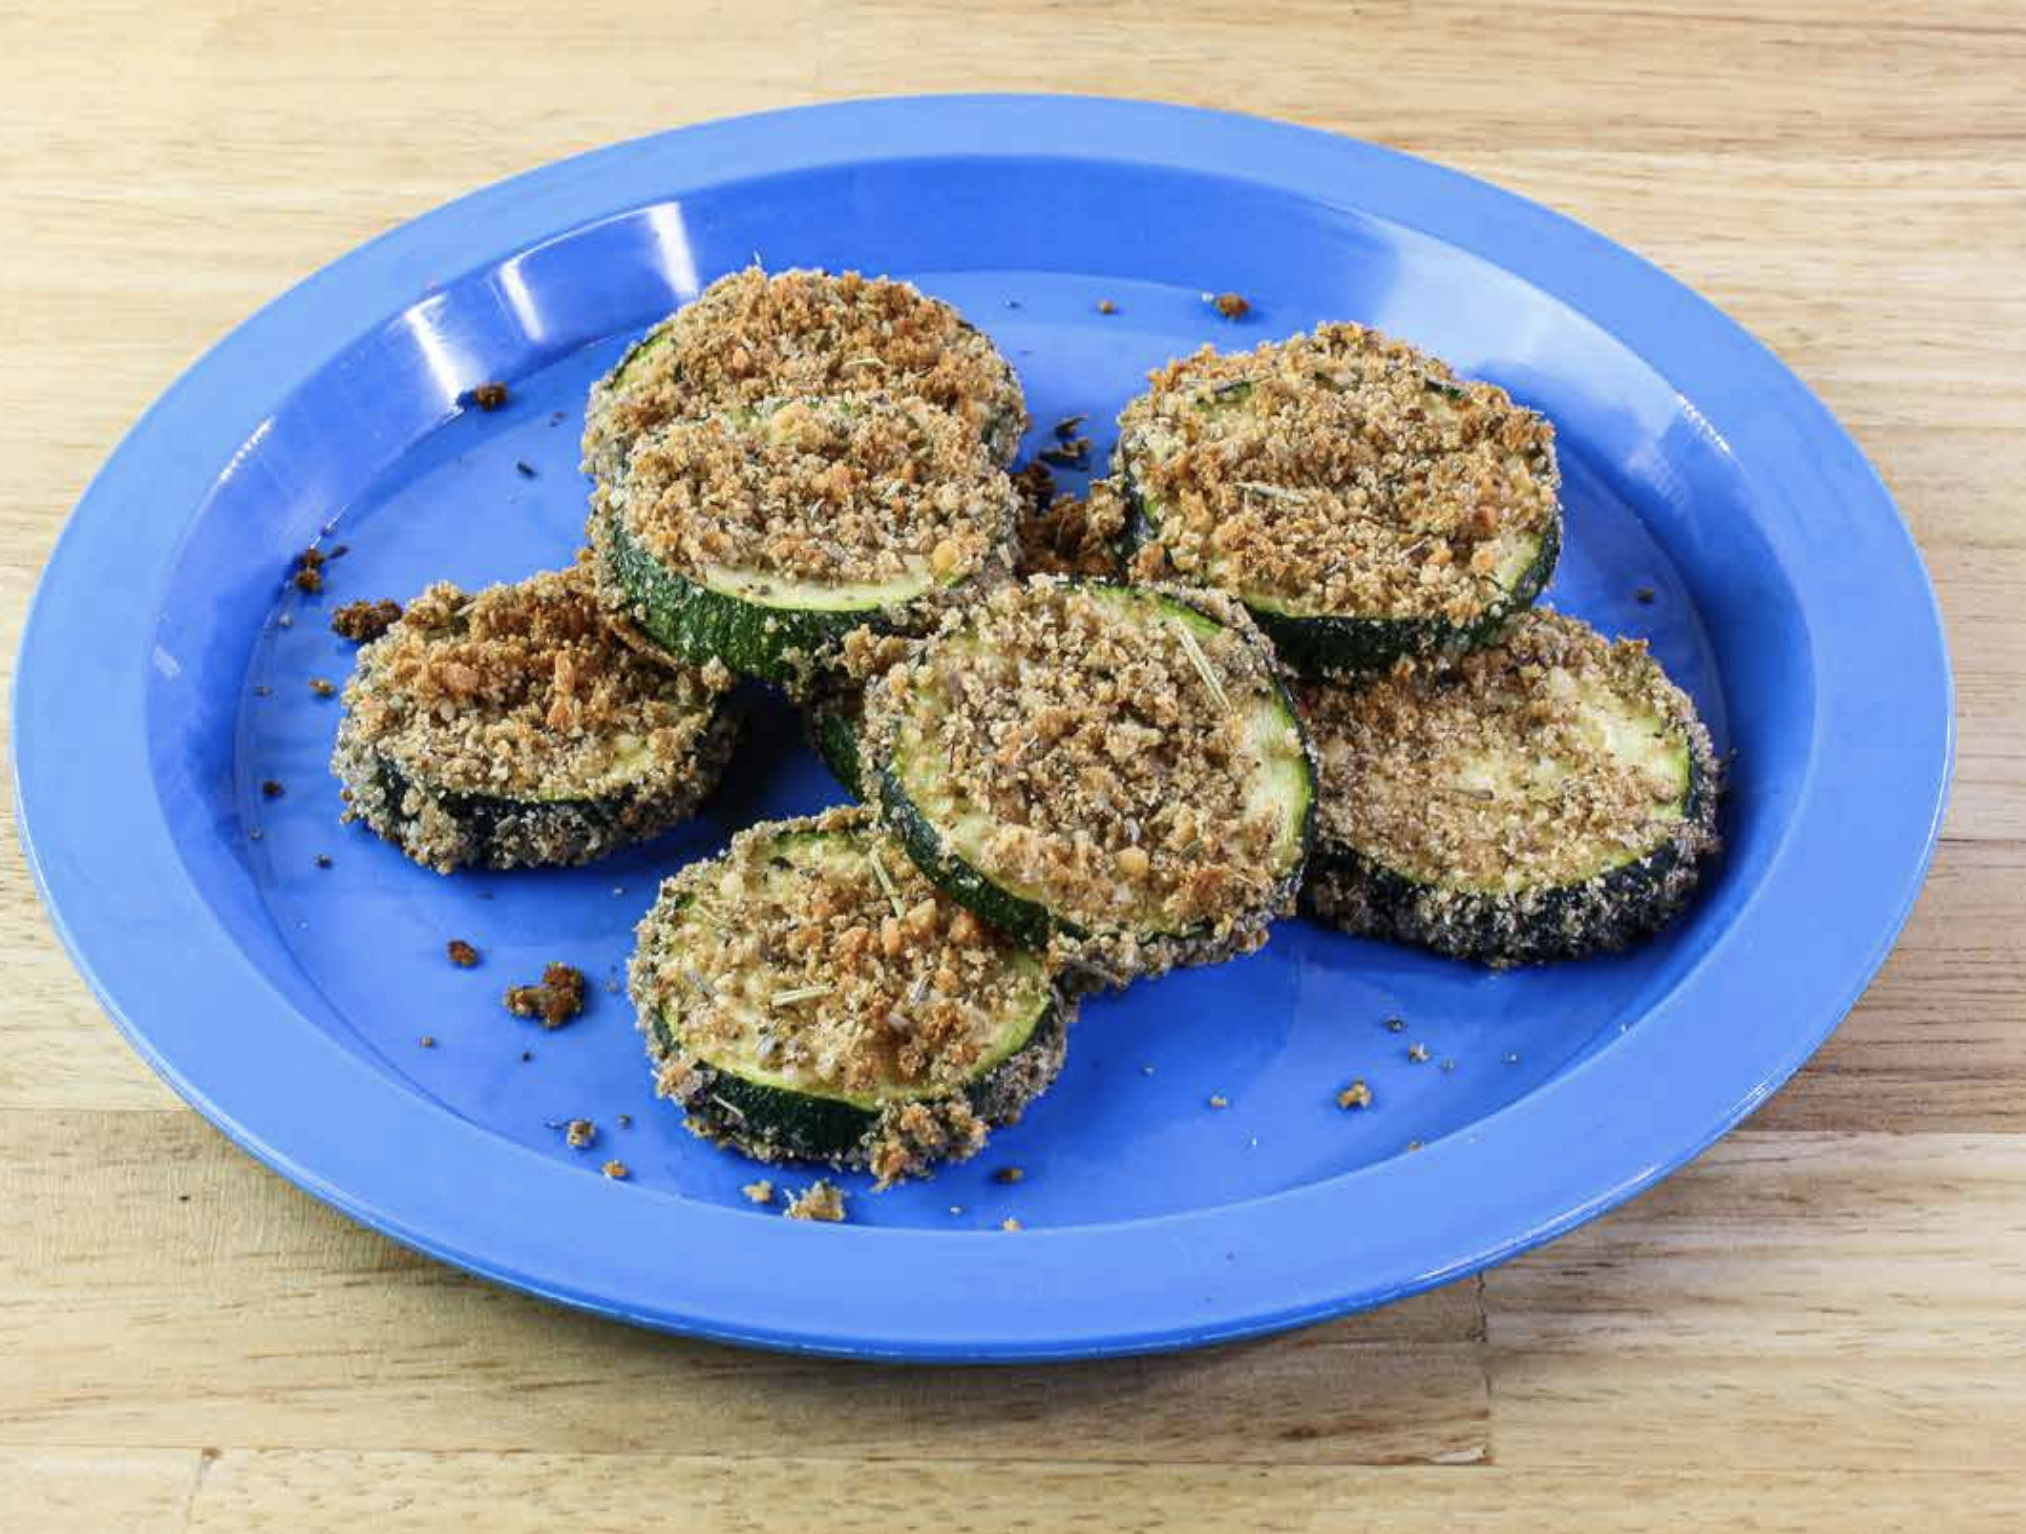 Parmesan Zucchini Chips from the Child Nutrition Recipe Box